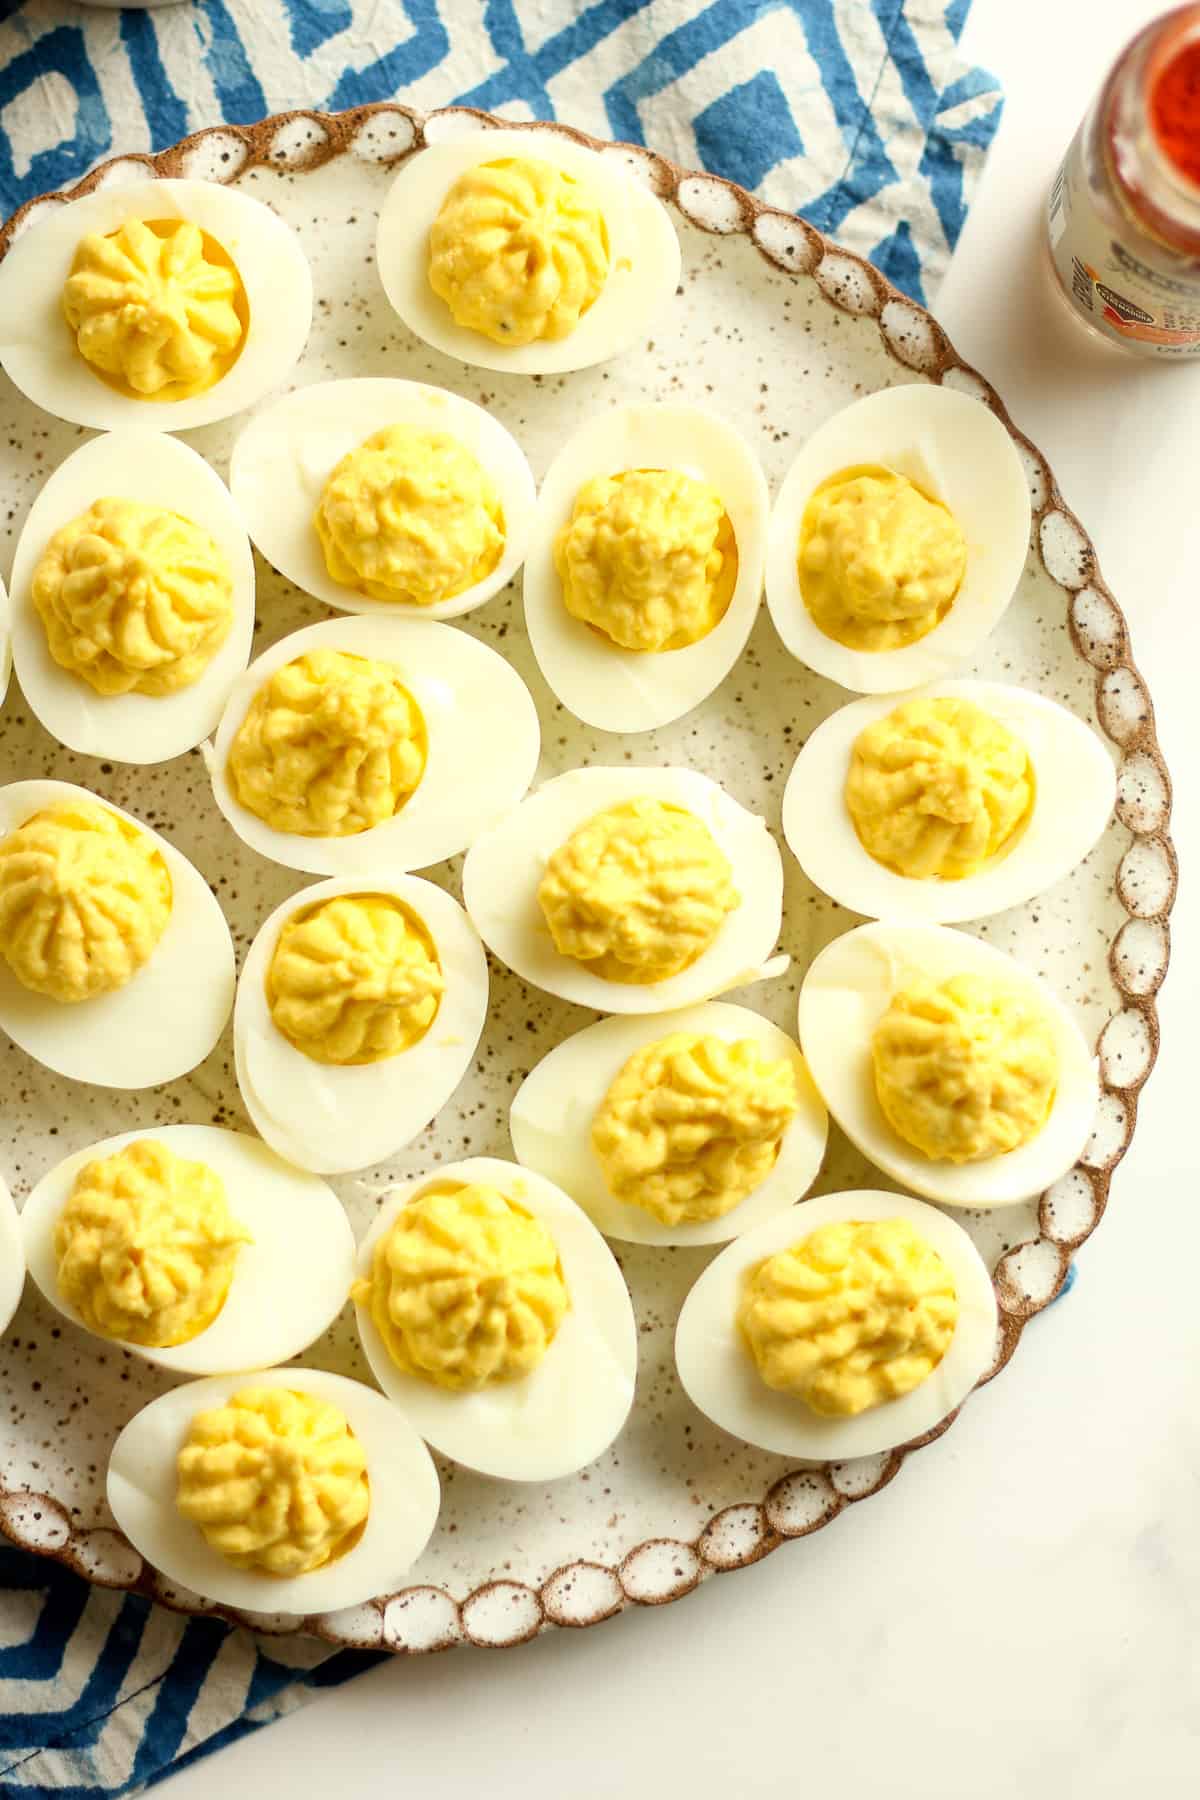 The deviled eggs on a plate before paprika topping.